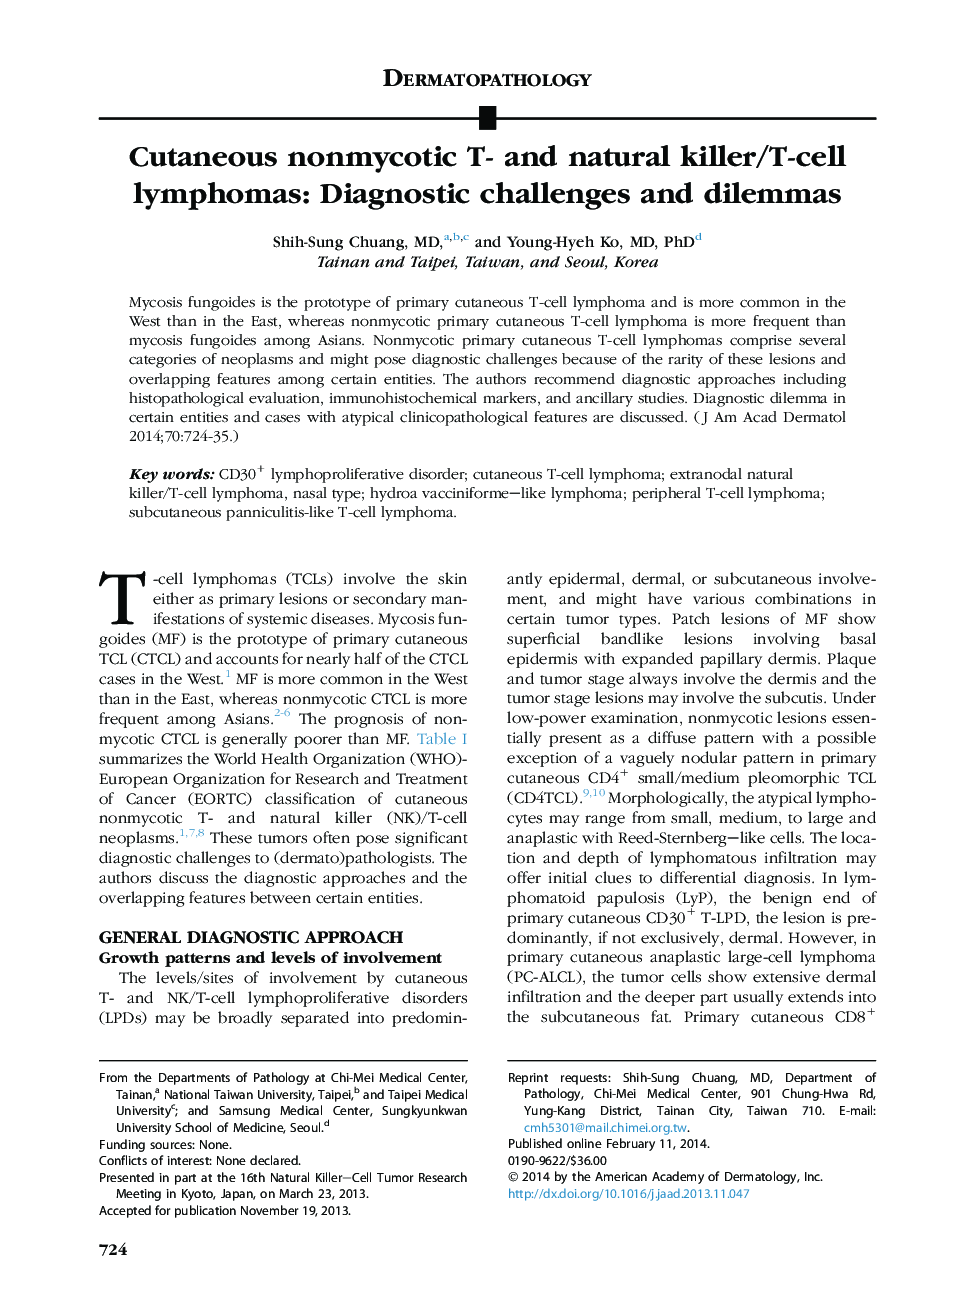 Cutaneous nonmycotic T- and natural killer/T-cell lymphomas: Diagnostic challenges and dilemmas